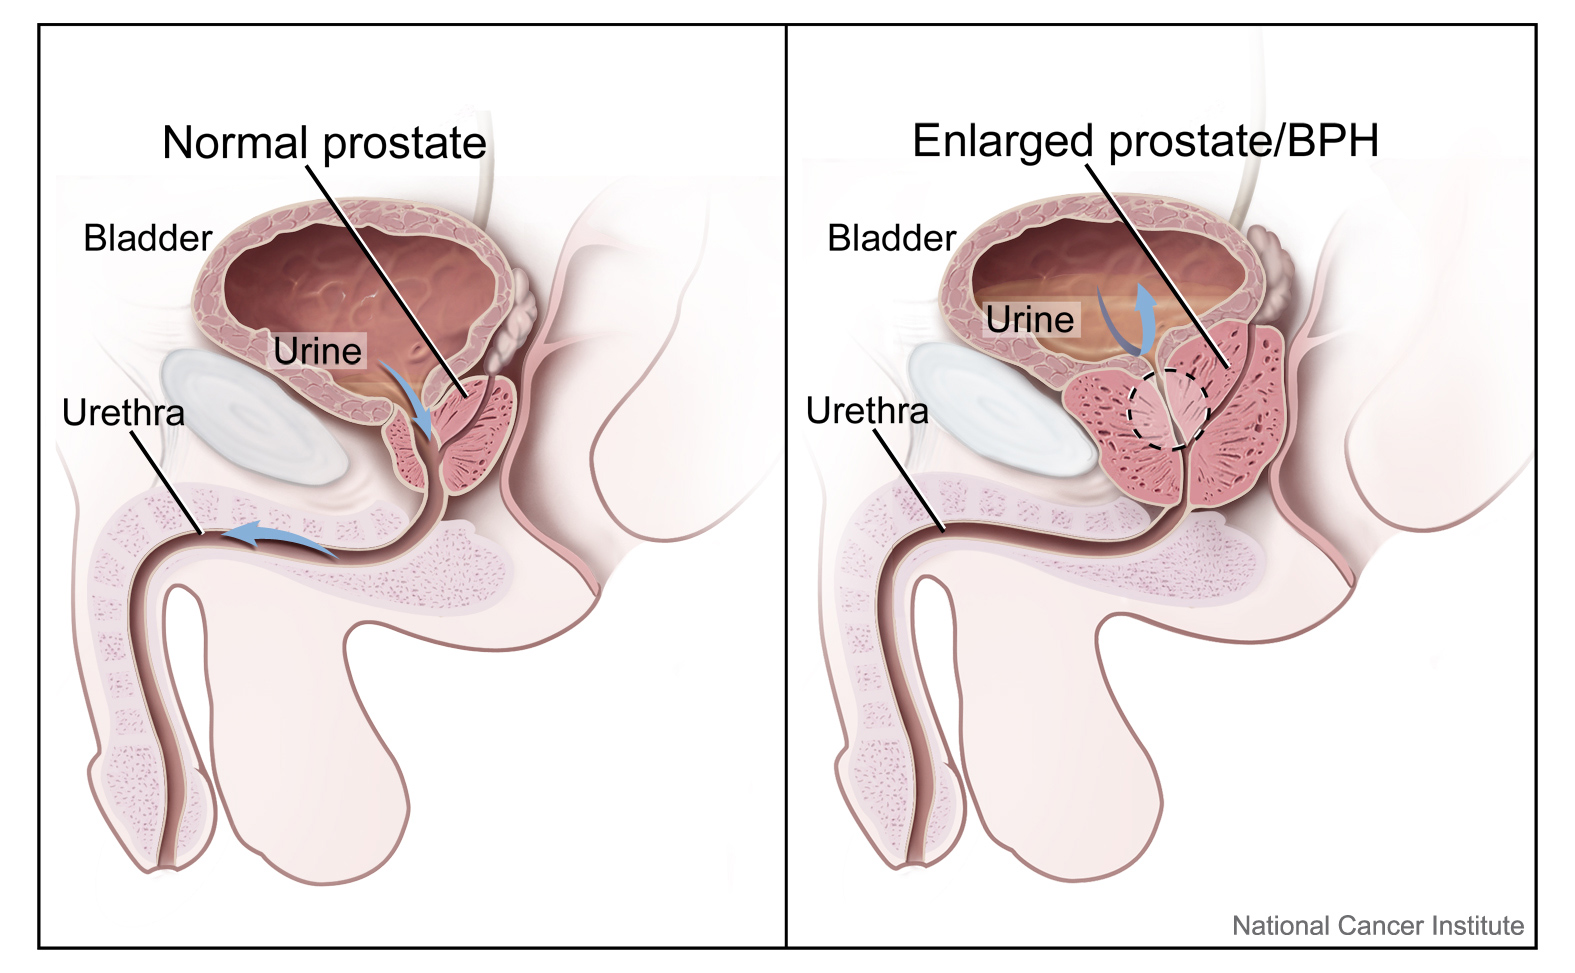 A diagram of a normal prostate vs. an enlarged prostate